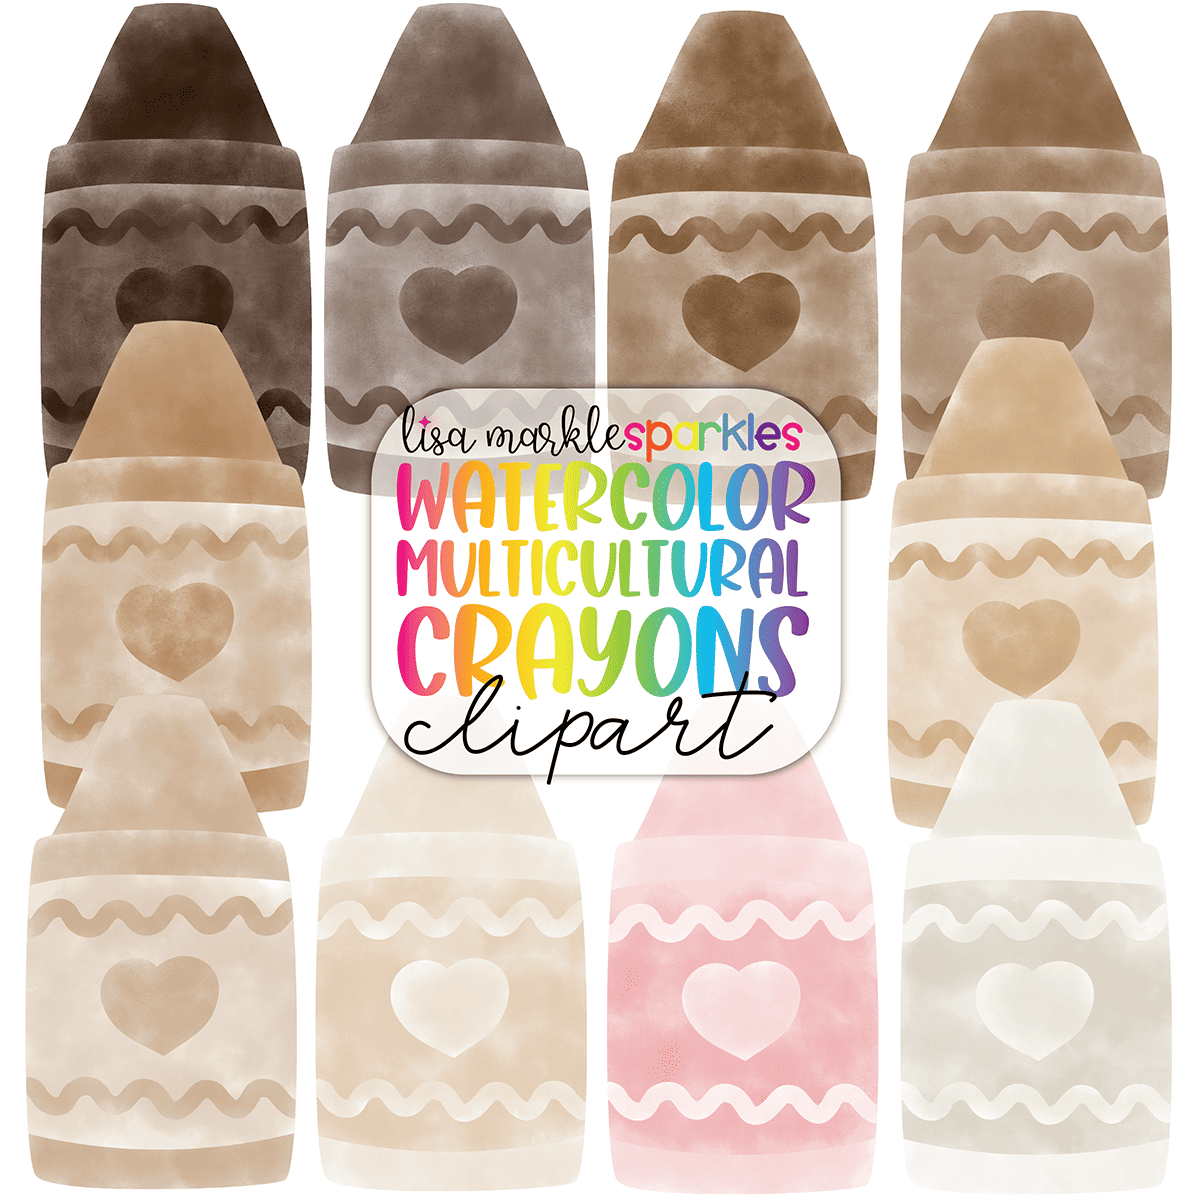 Watercolor Multicultural Skin Tone Crayon Clipart - Lisa Markle Sparkles  Clipart and Graphic Design